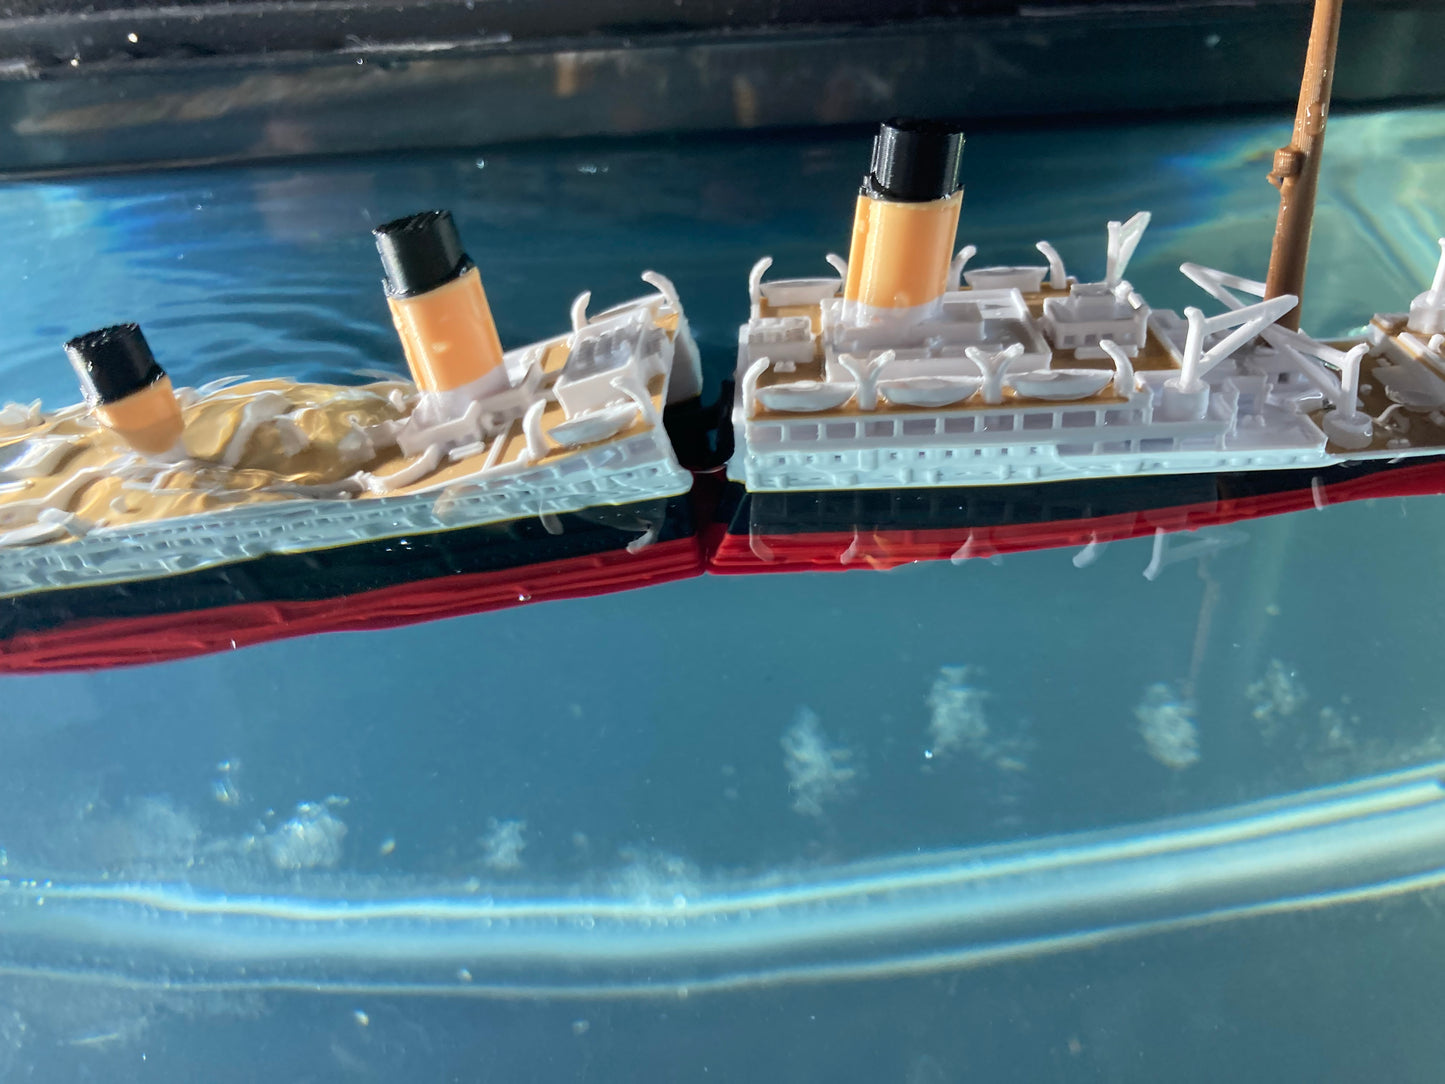 RMS Titanic Submersible Model, Educational Model, FLOATS & SINKS Historically accurate